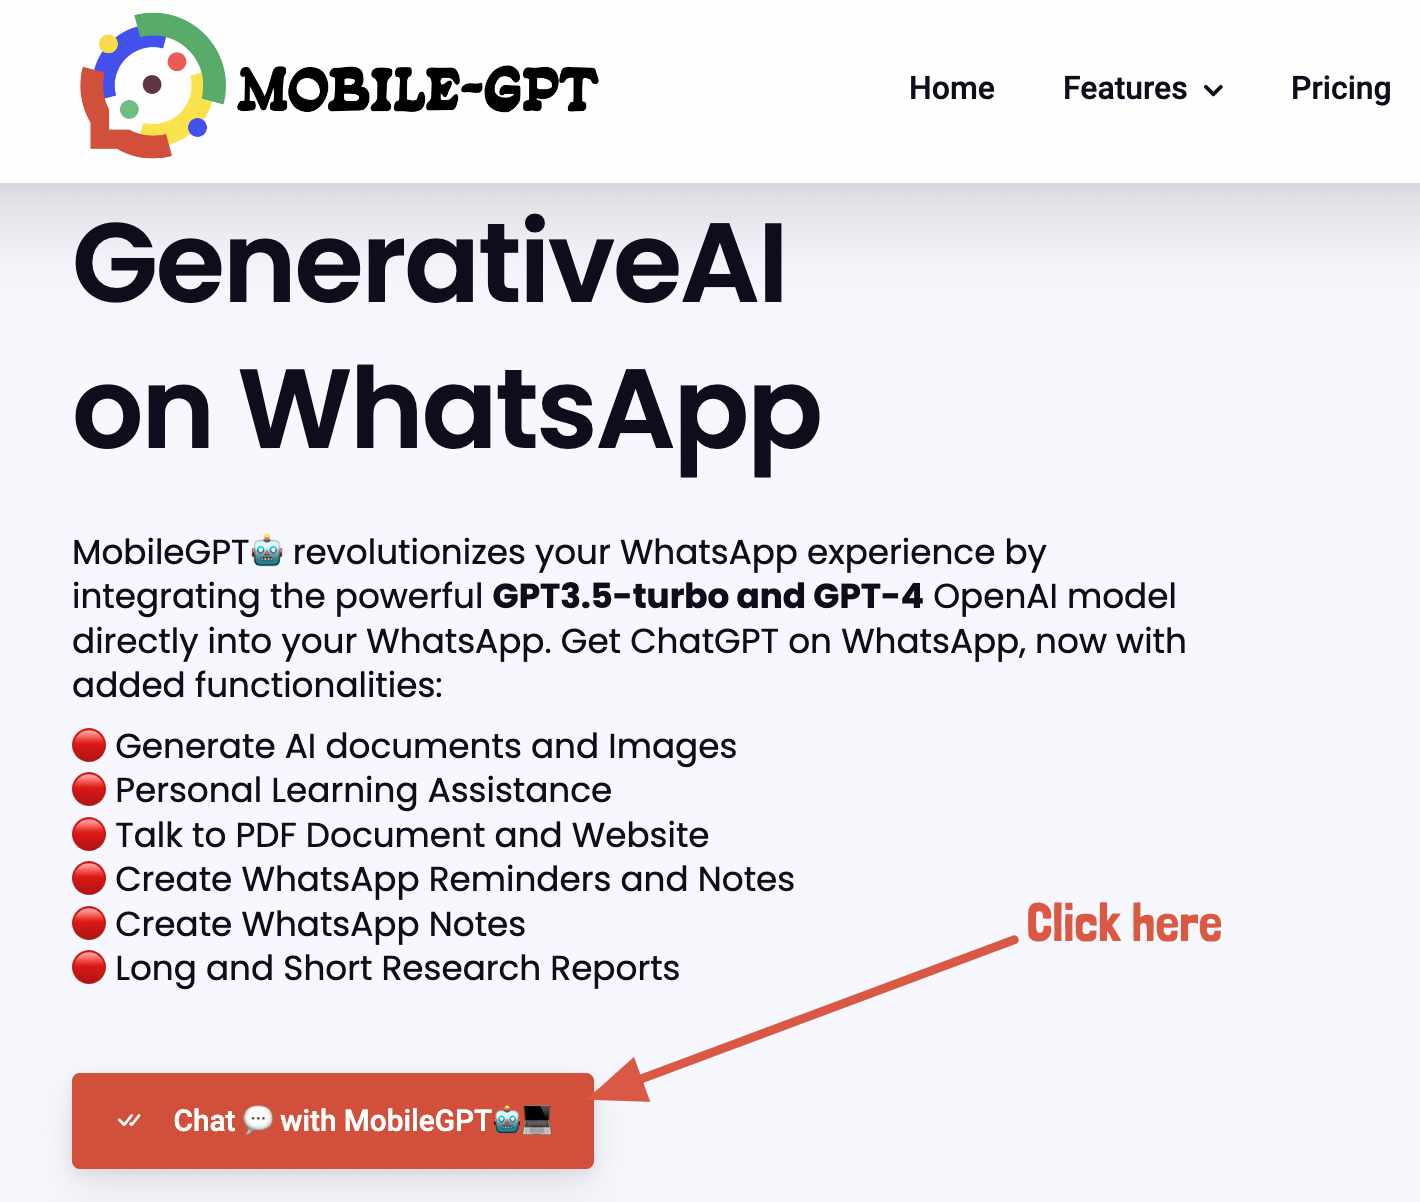 Getting started with MobileGPT ChatGPT on WhatsApp